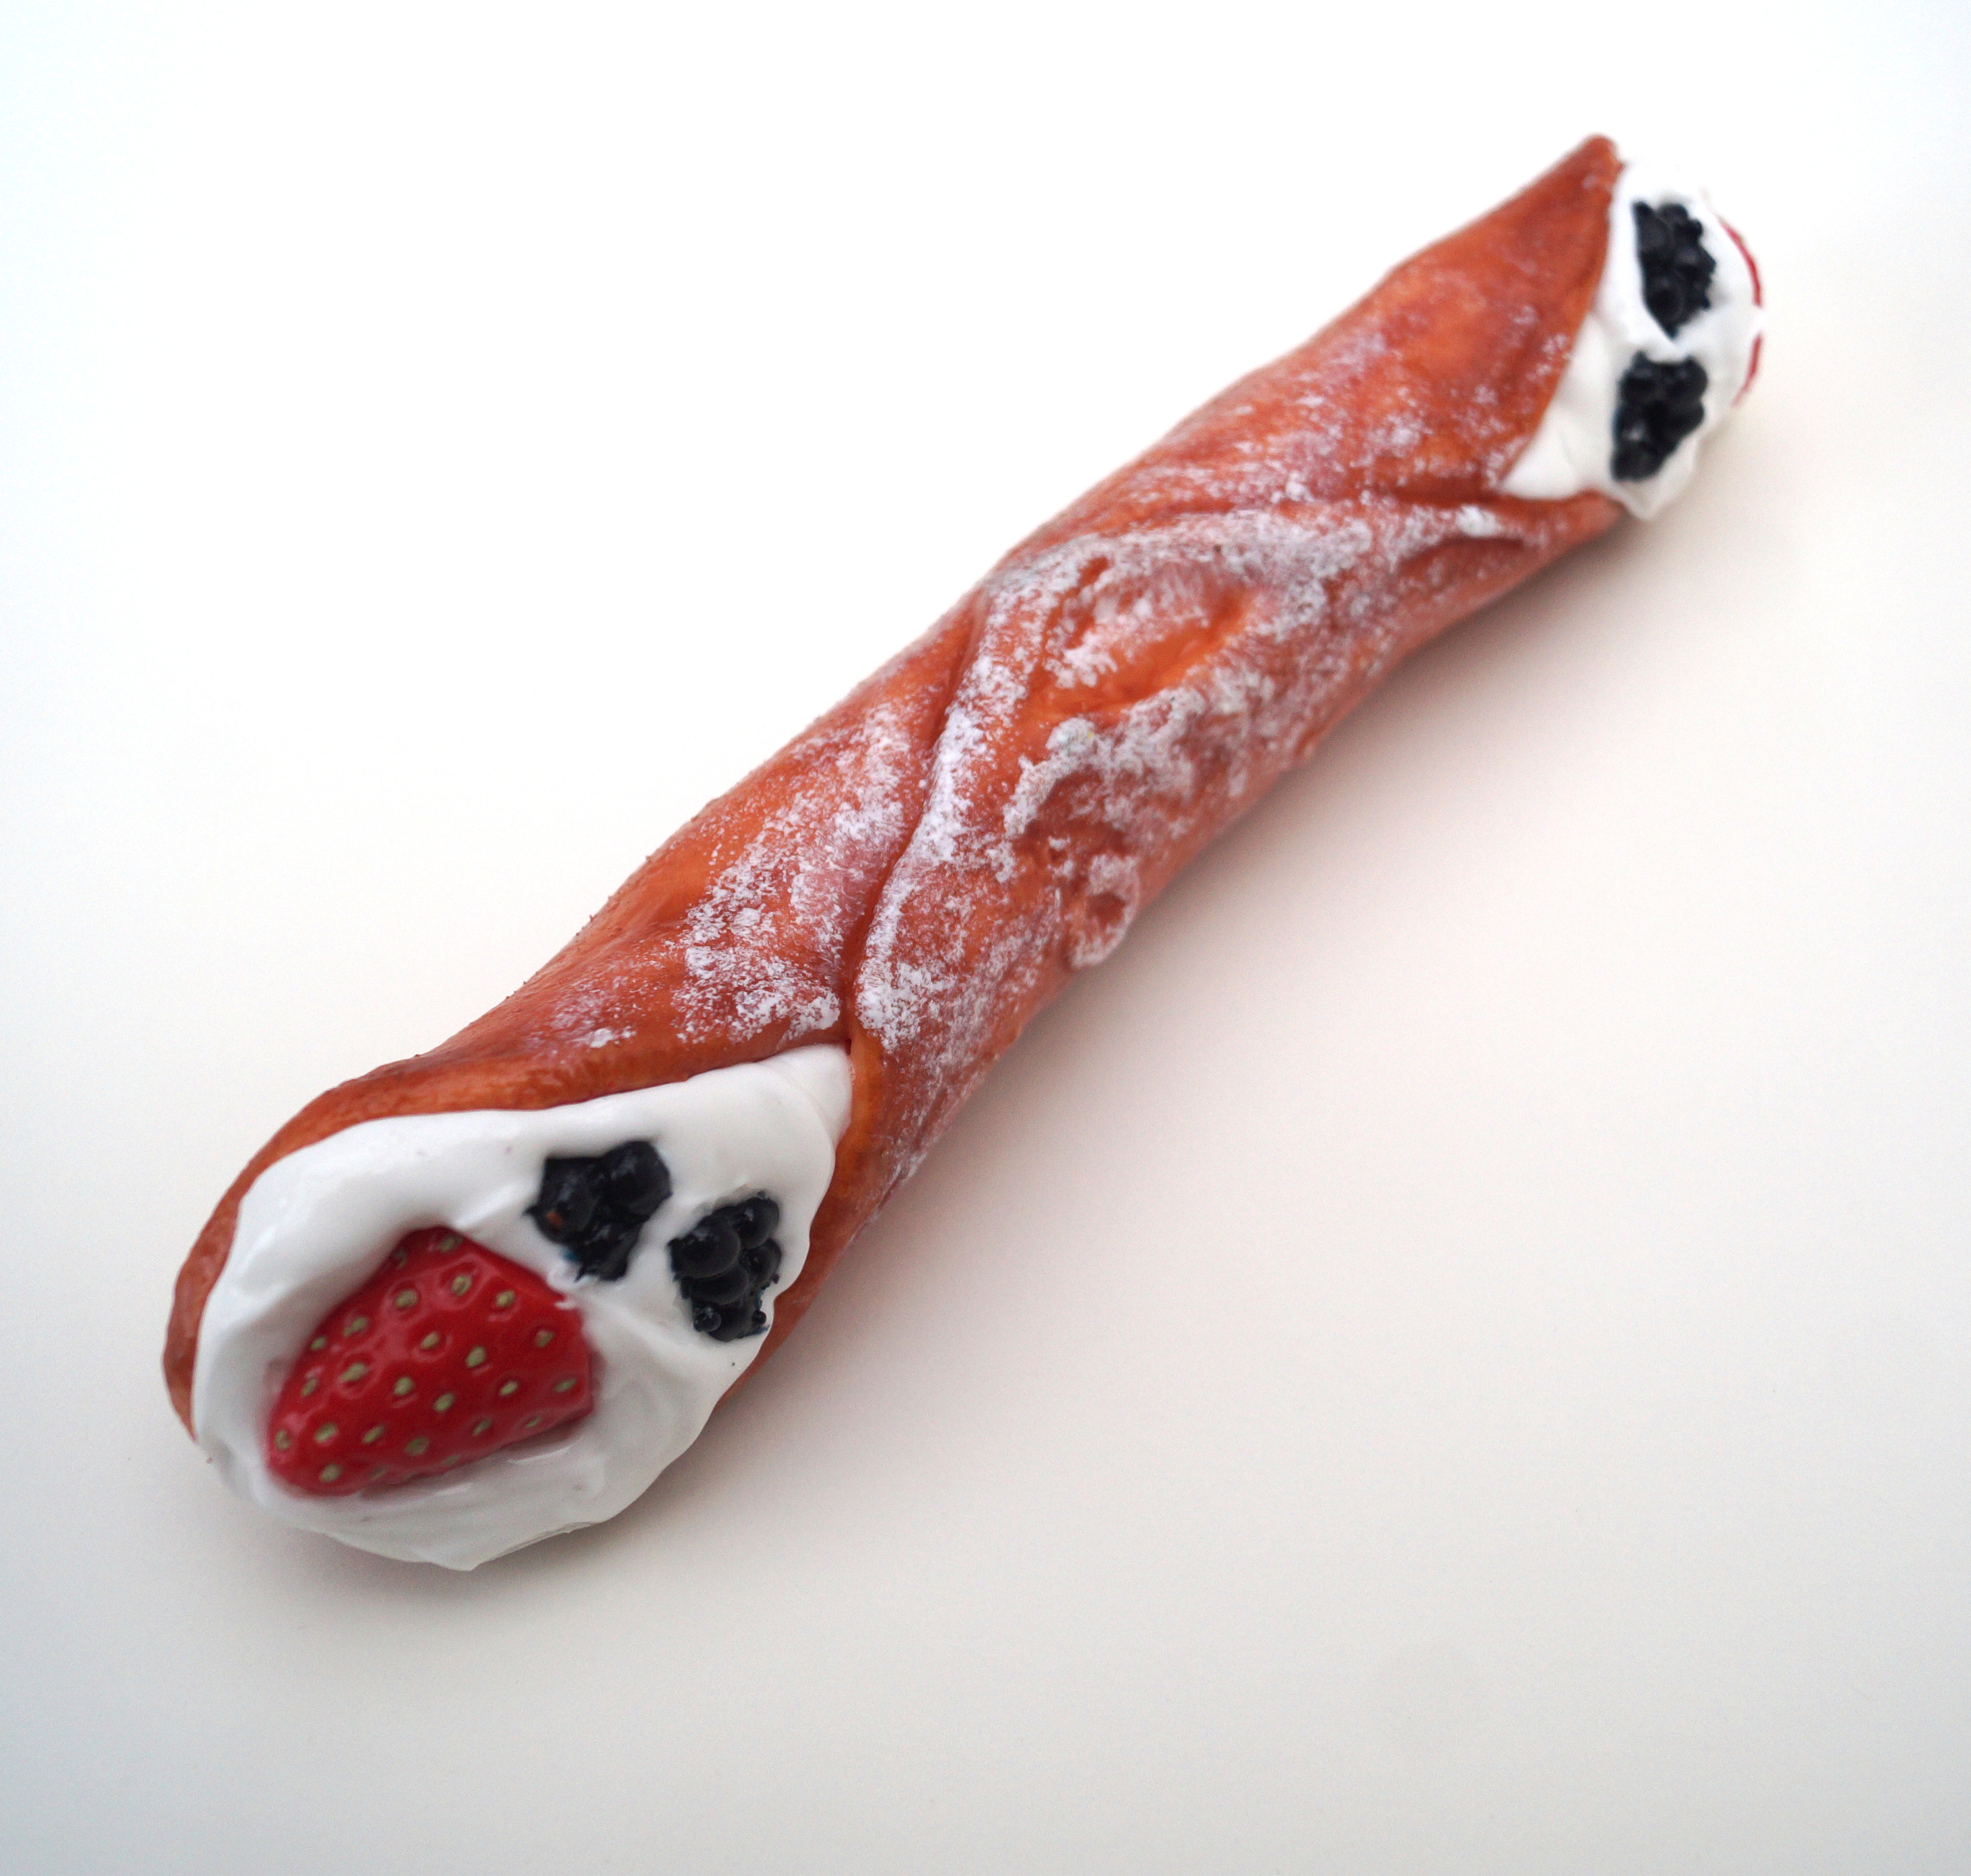 Premium Cannolo with sugar and fruits - the Sicilian variation of our love treats photo